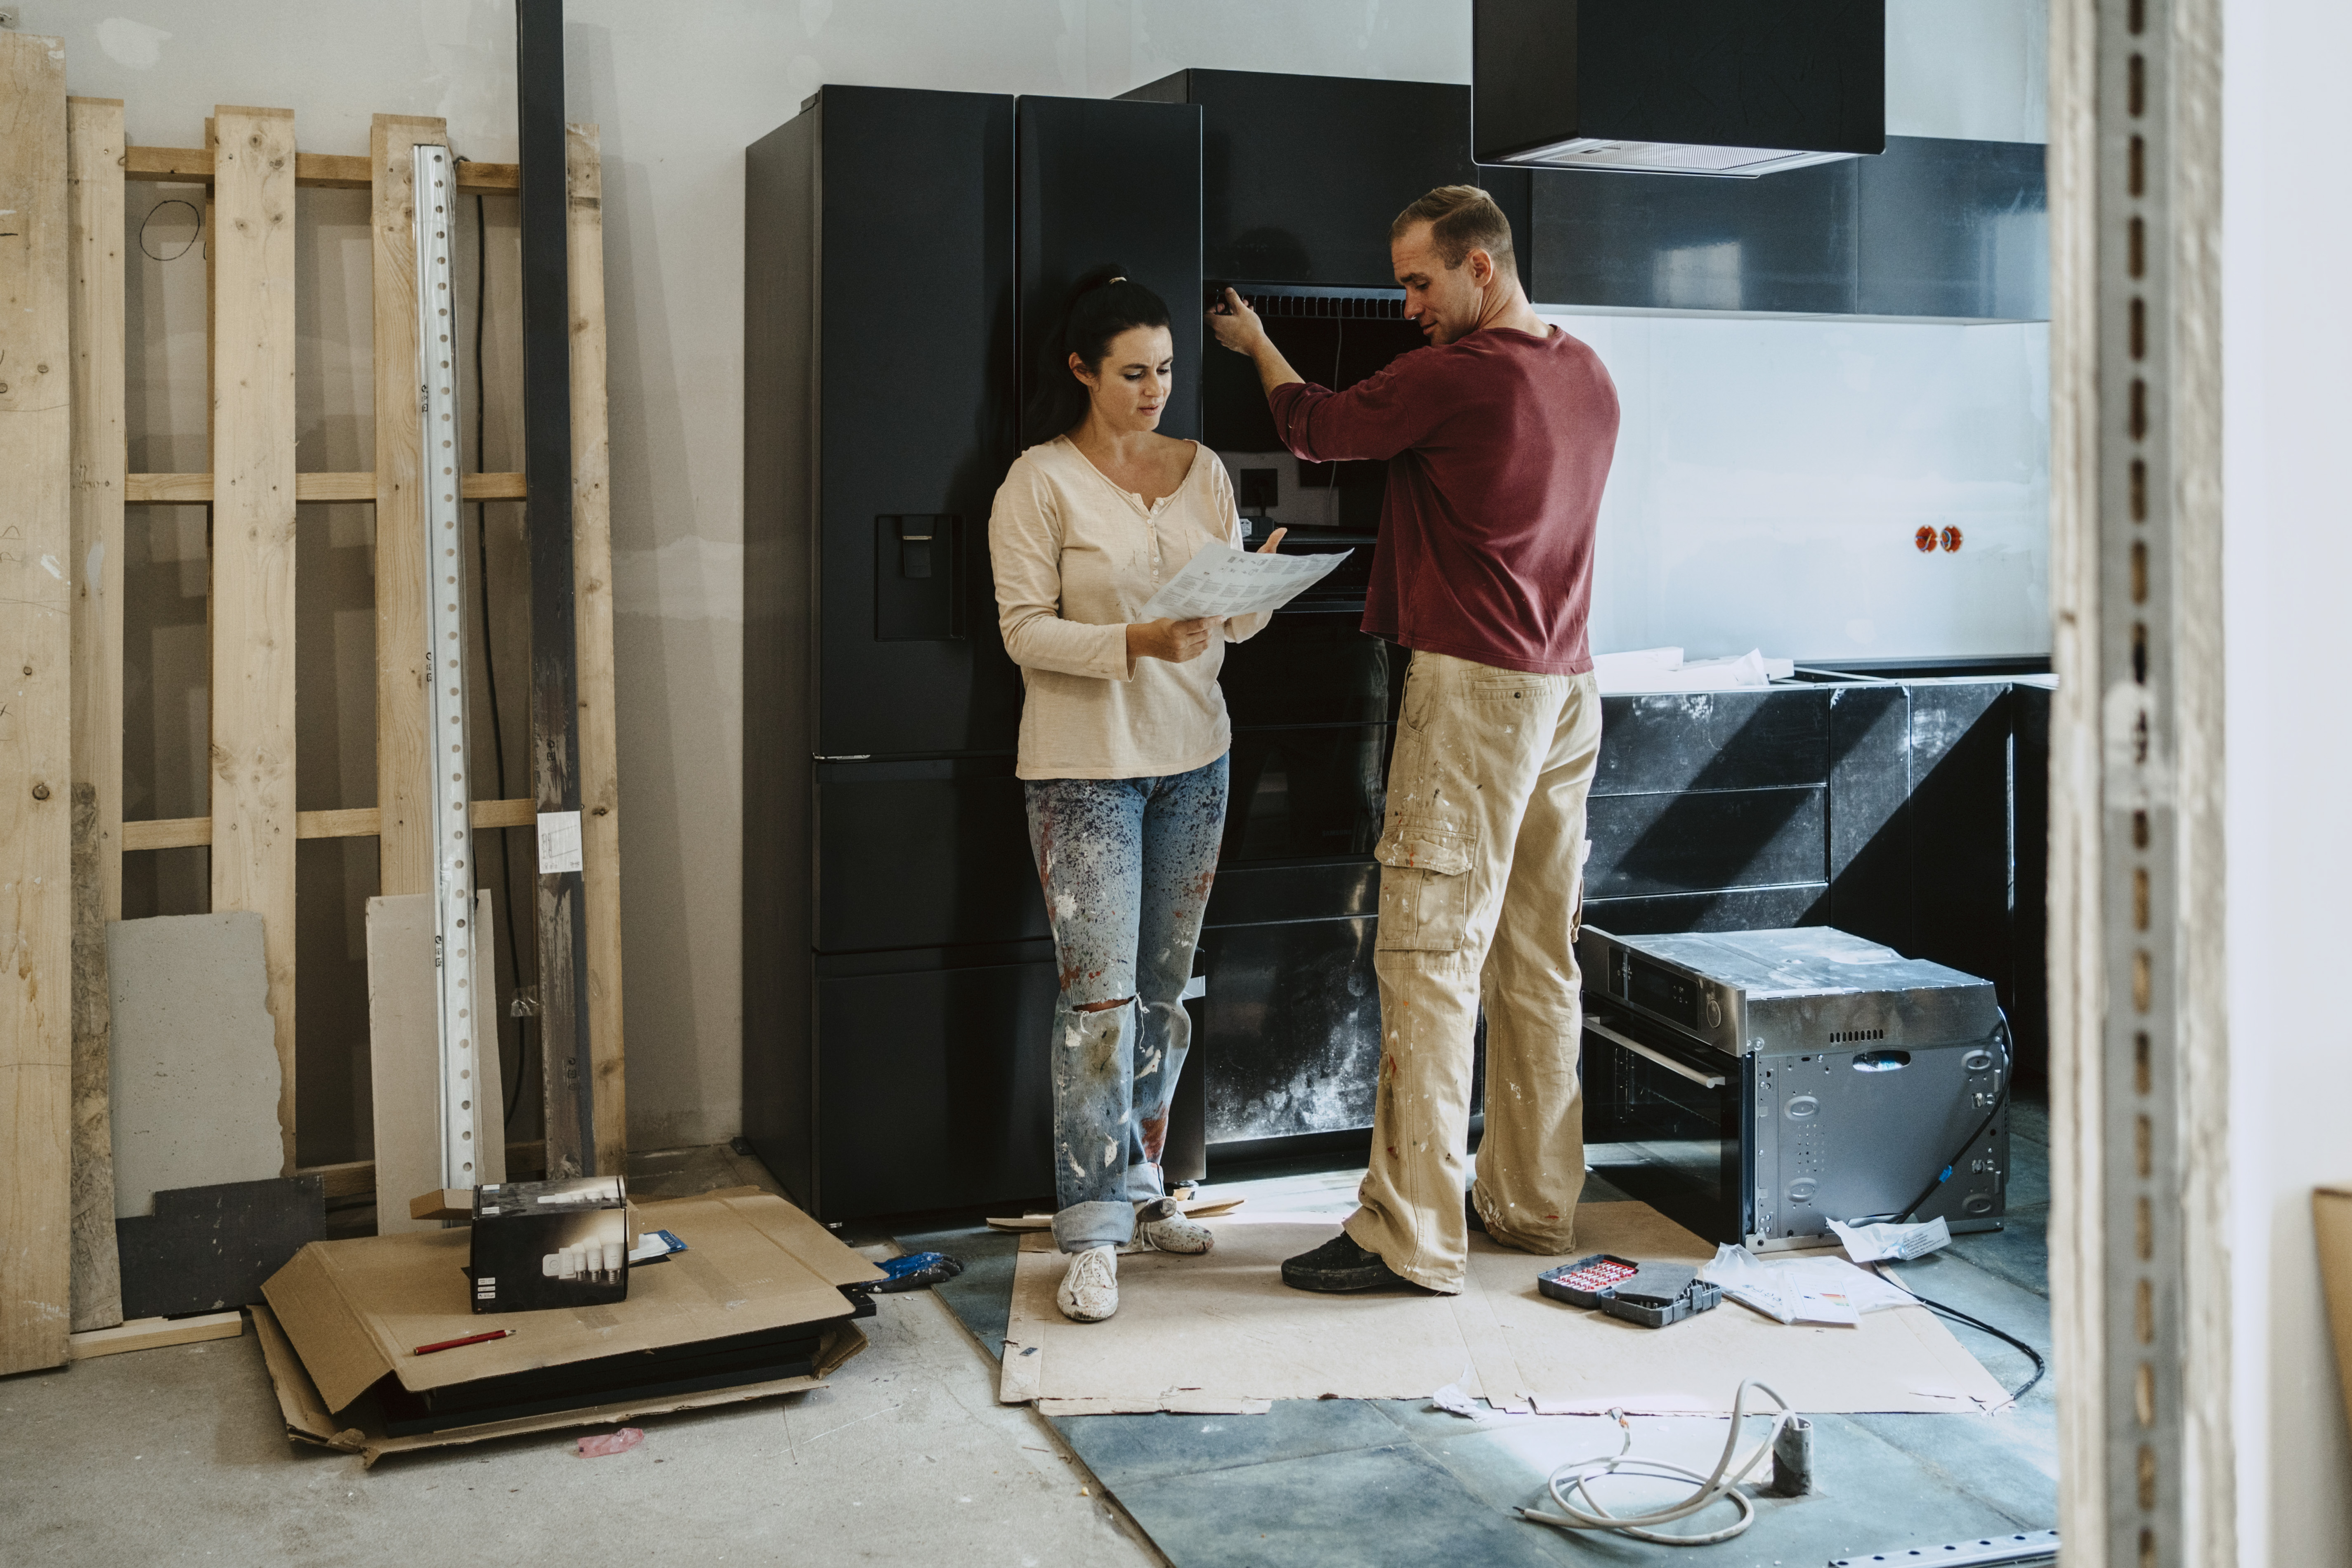 A couple remodeling their kitchen | Source: Getty Images